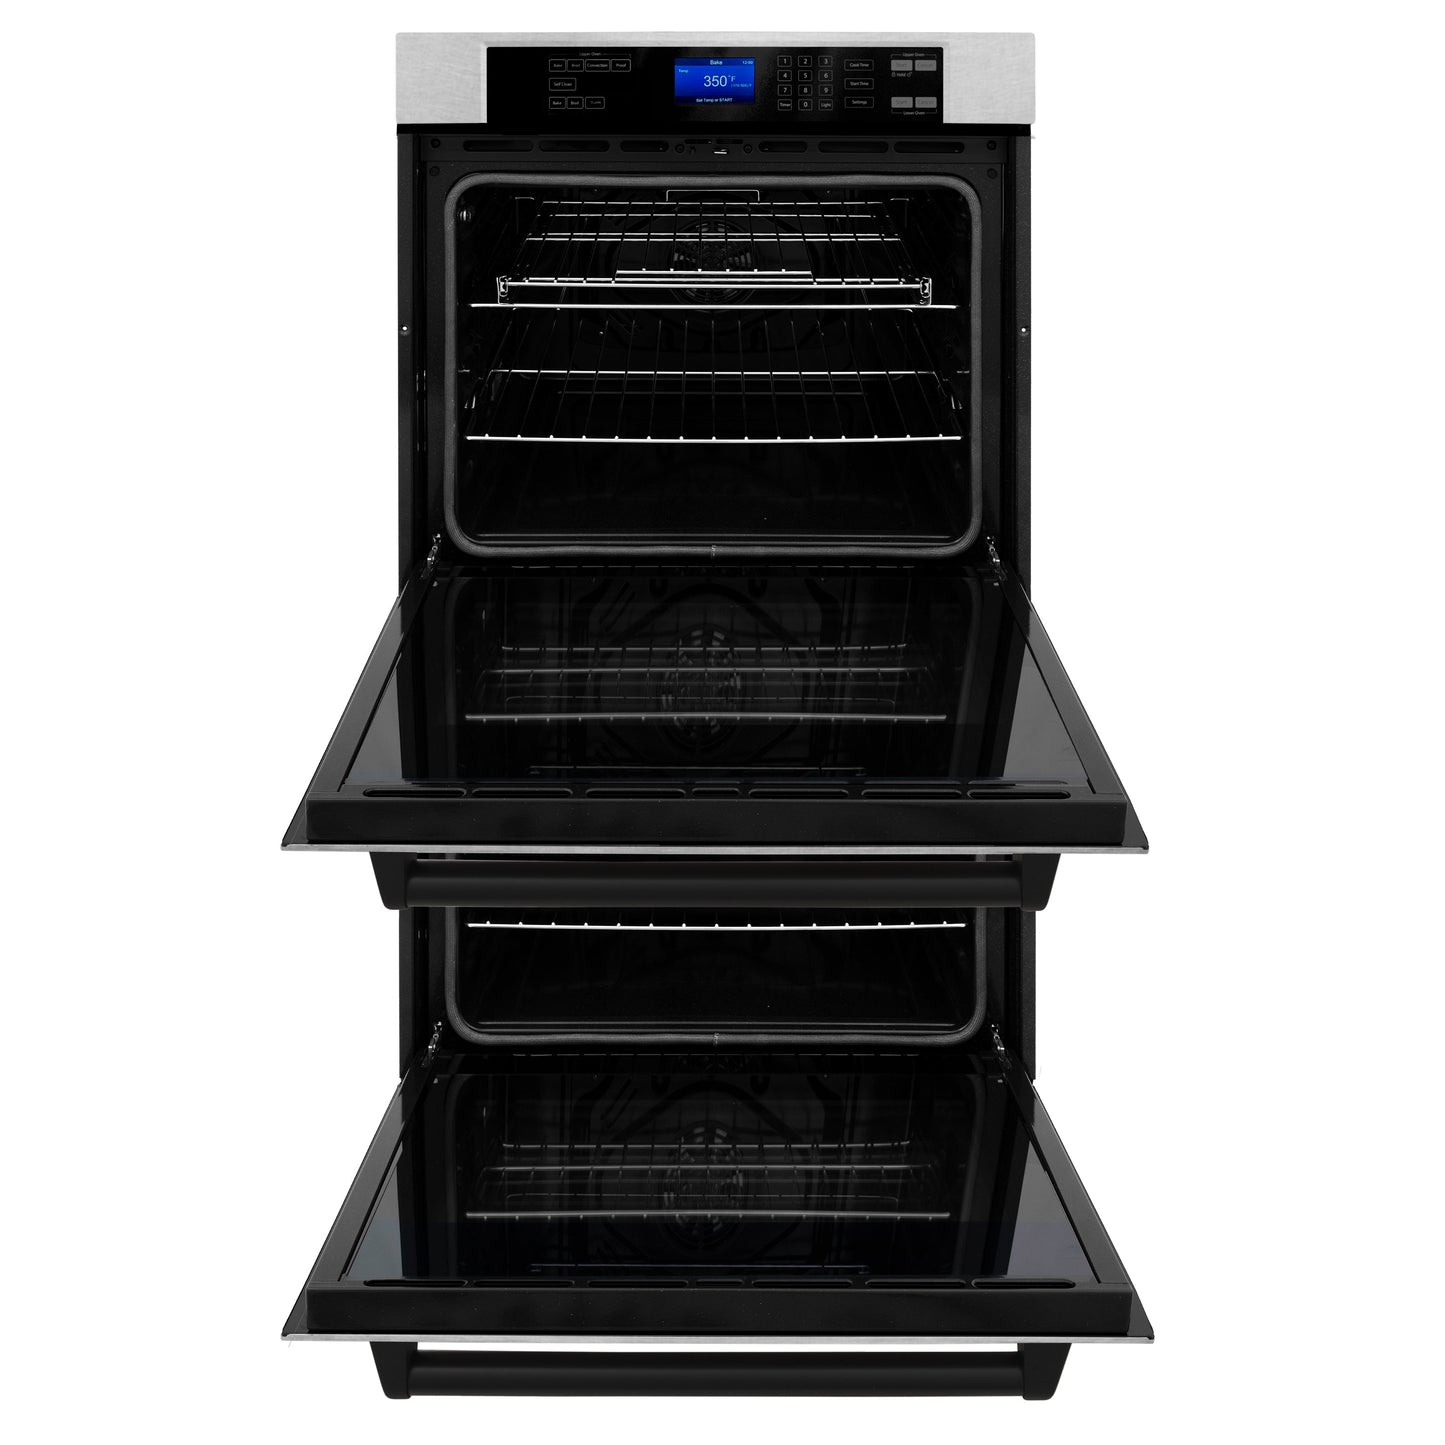 ZLINE 30" Autograph Edition Double Wall Oven with Self Clean and True Convection in DuraSnow Stainless Steel and Matte Black